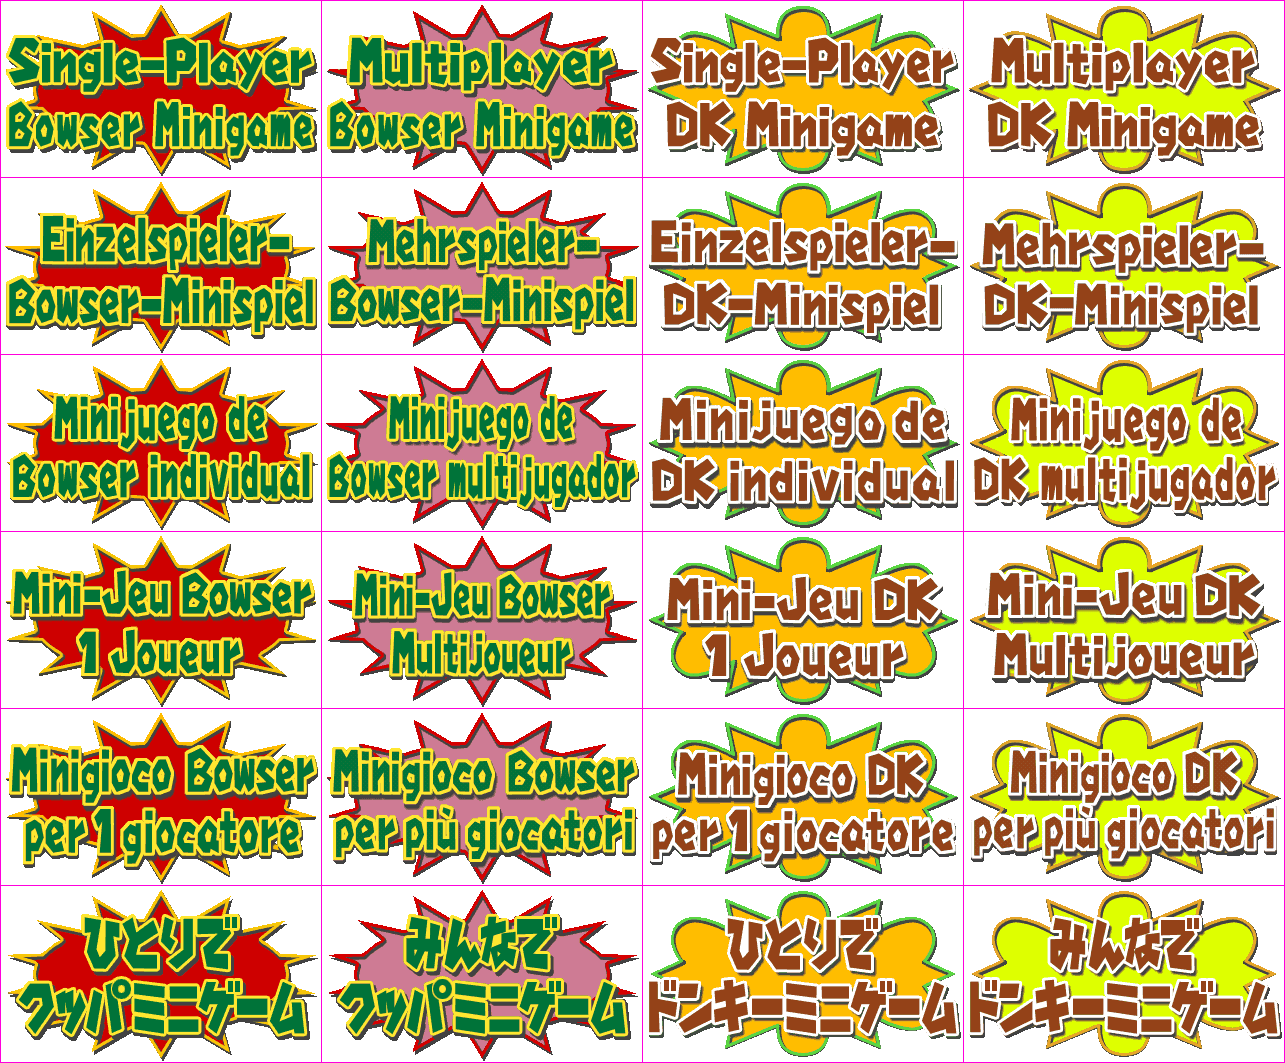 Mario Party 7 - Bowser & DK Events